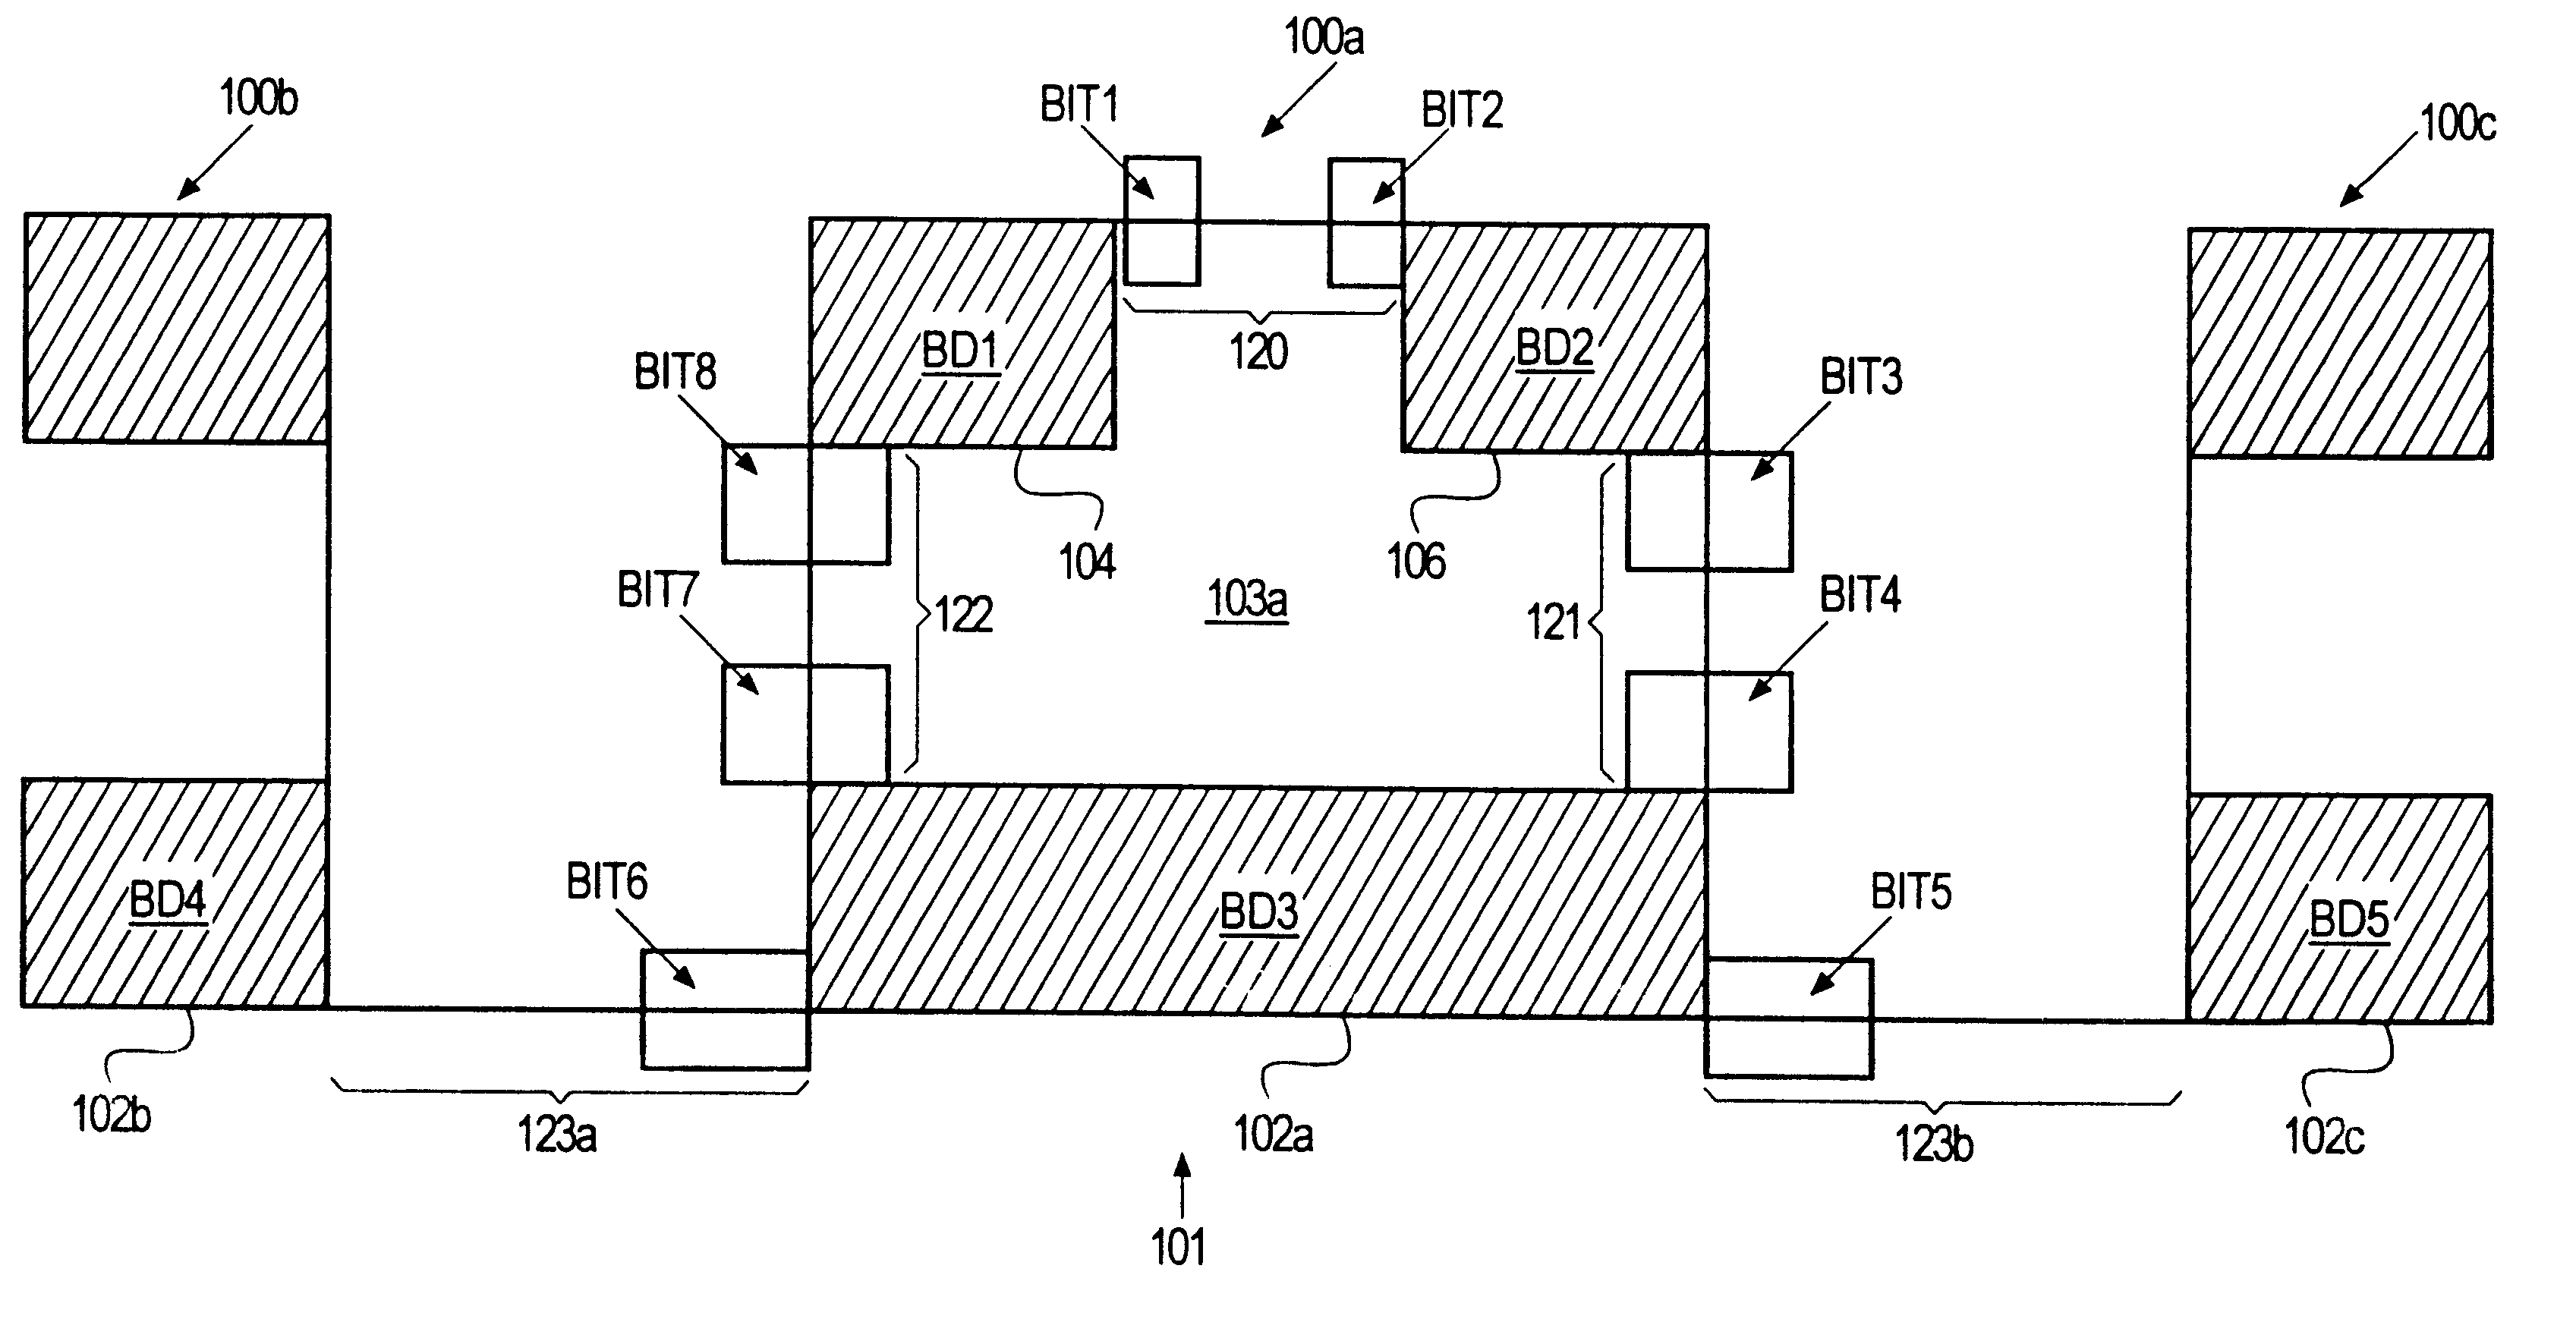 8 bit per cell non-volatile semiconductor memory structure utilizing trench technology and dielectric floating gate